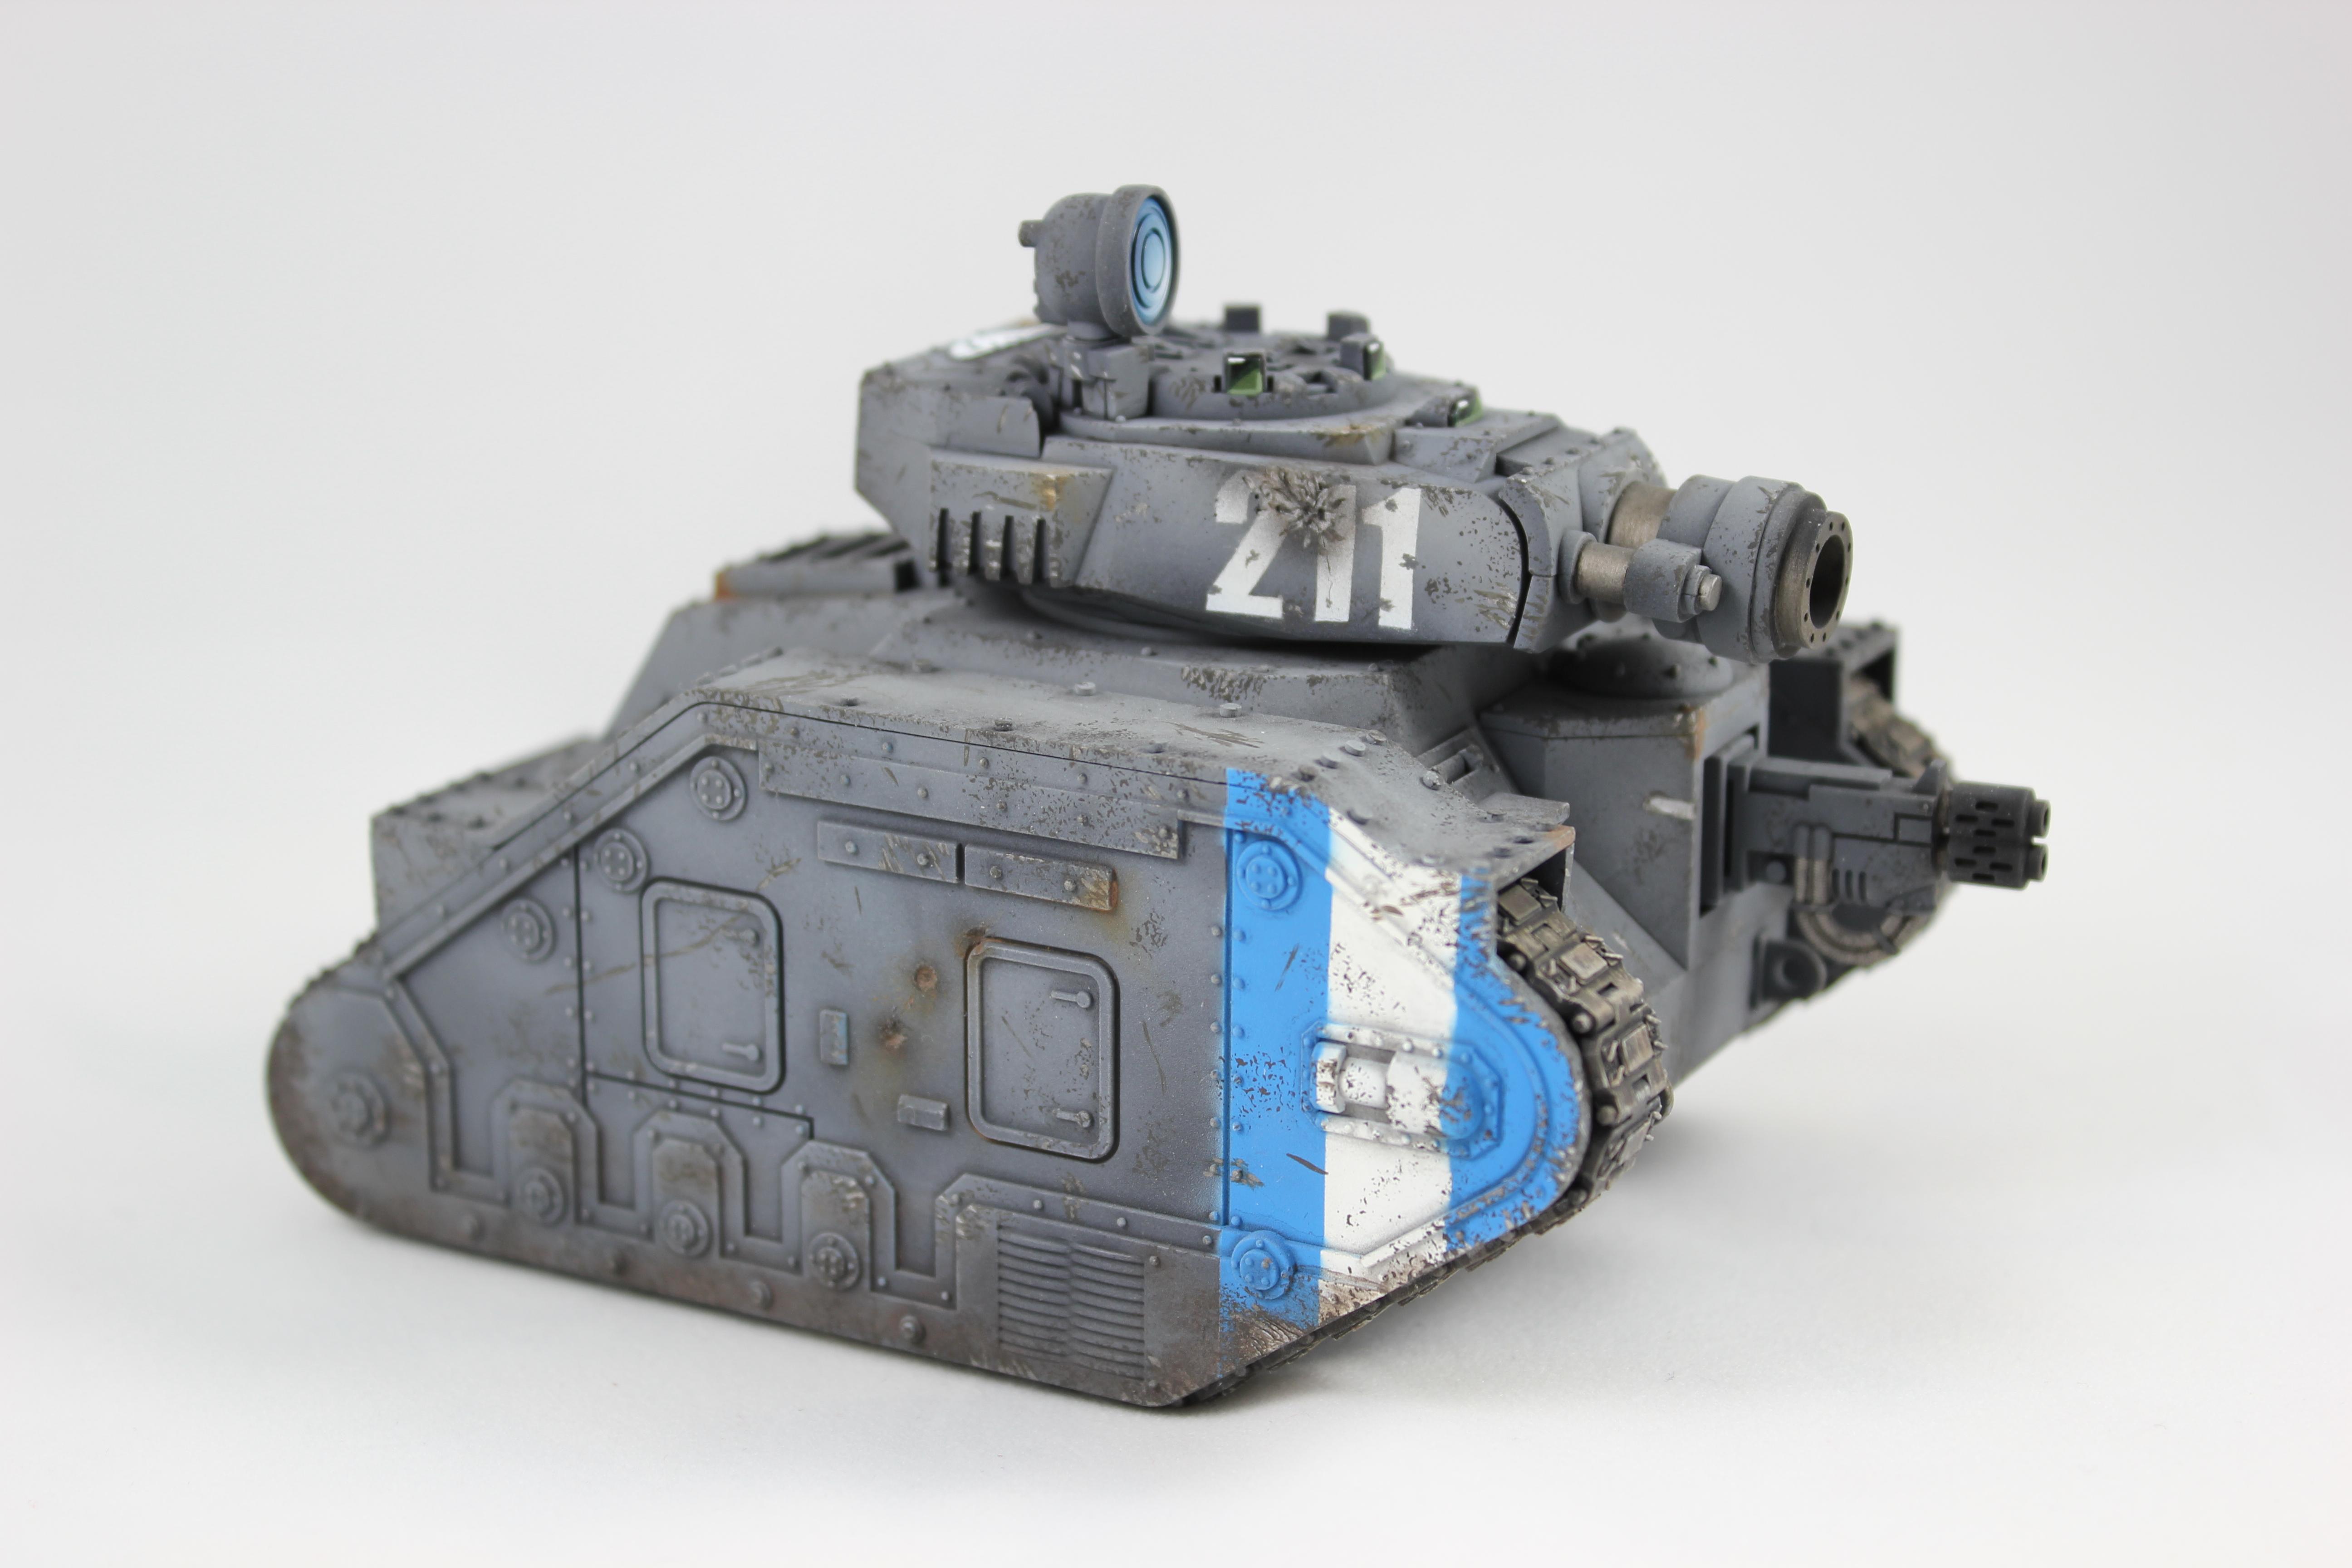 Airbrush, Armor, Camouflage, Cities Of Death, Guard, Imperial Guard, Leman Russ, Tank, Urban